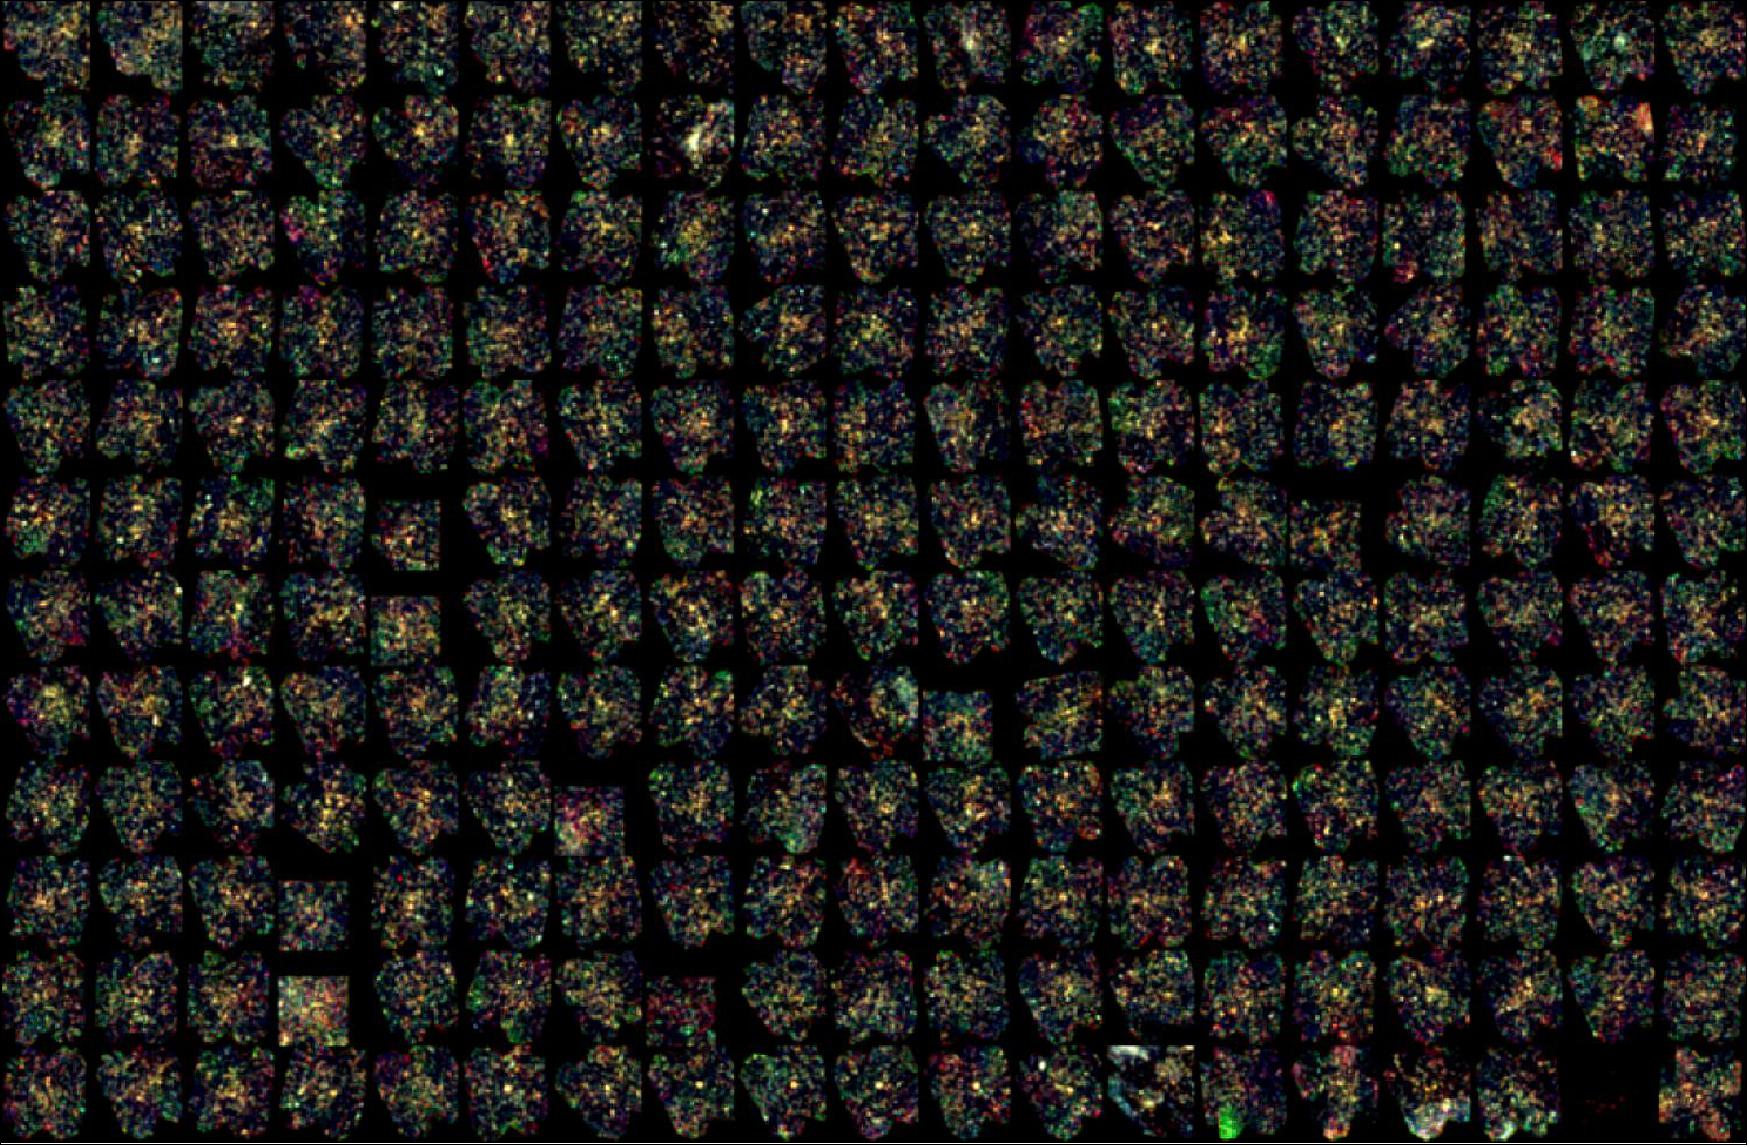 Figure 23: If you put 228 old TV sets together, the poorly synced images on their screens might look a bit like what you see here. But the science behind these shots – and the technology required to obtain them – is far more fascinating than what their appearance might suggest. — Rather than pixelated colorful static, the vast majority of these 228 shots shows dense concentrations of far-away galaxies that could be the seeds of the galaxy clusters we see in today’s Universe (image credit: ESA/Herschel/SPIRE/Planck consortia and H. Dole, D. Guéry, IAS, CNRS, Université Paris-Saclay)